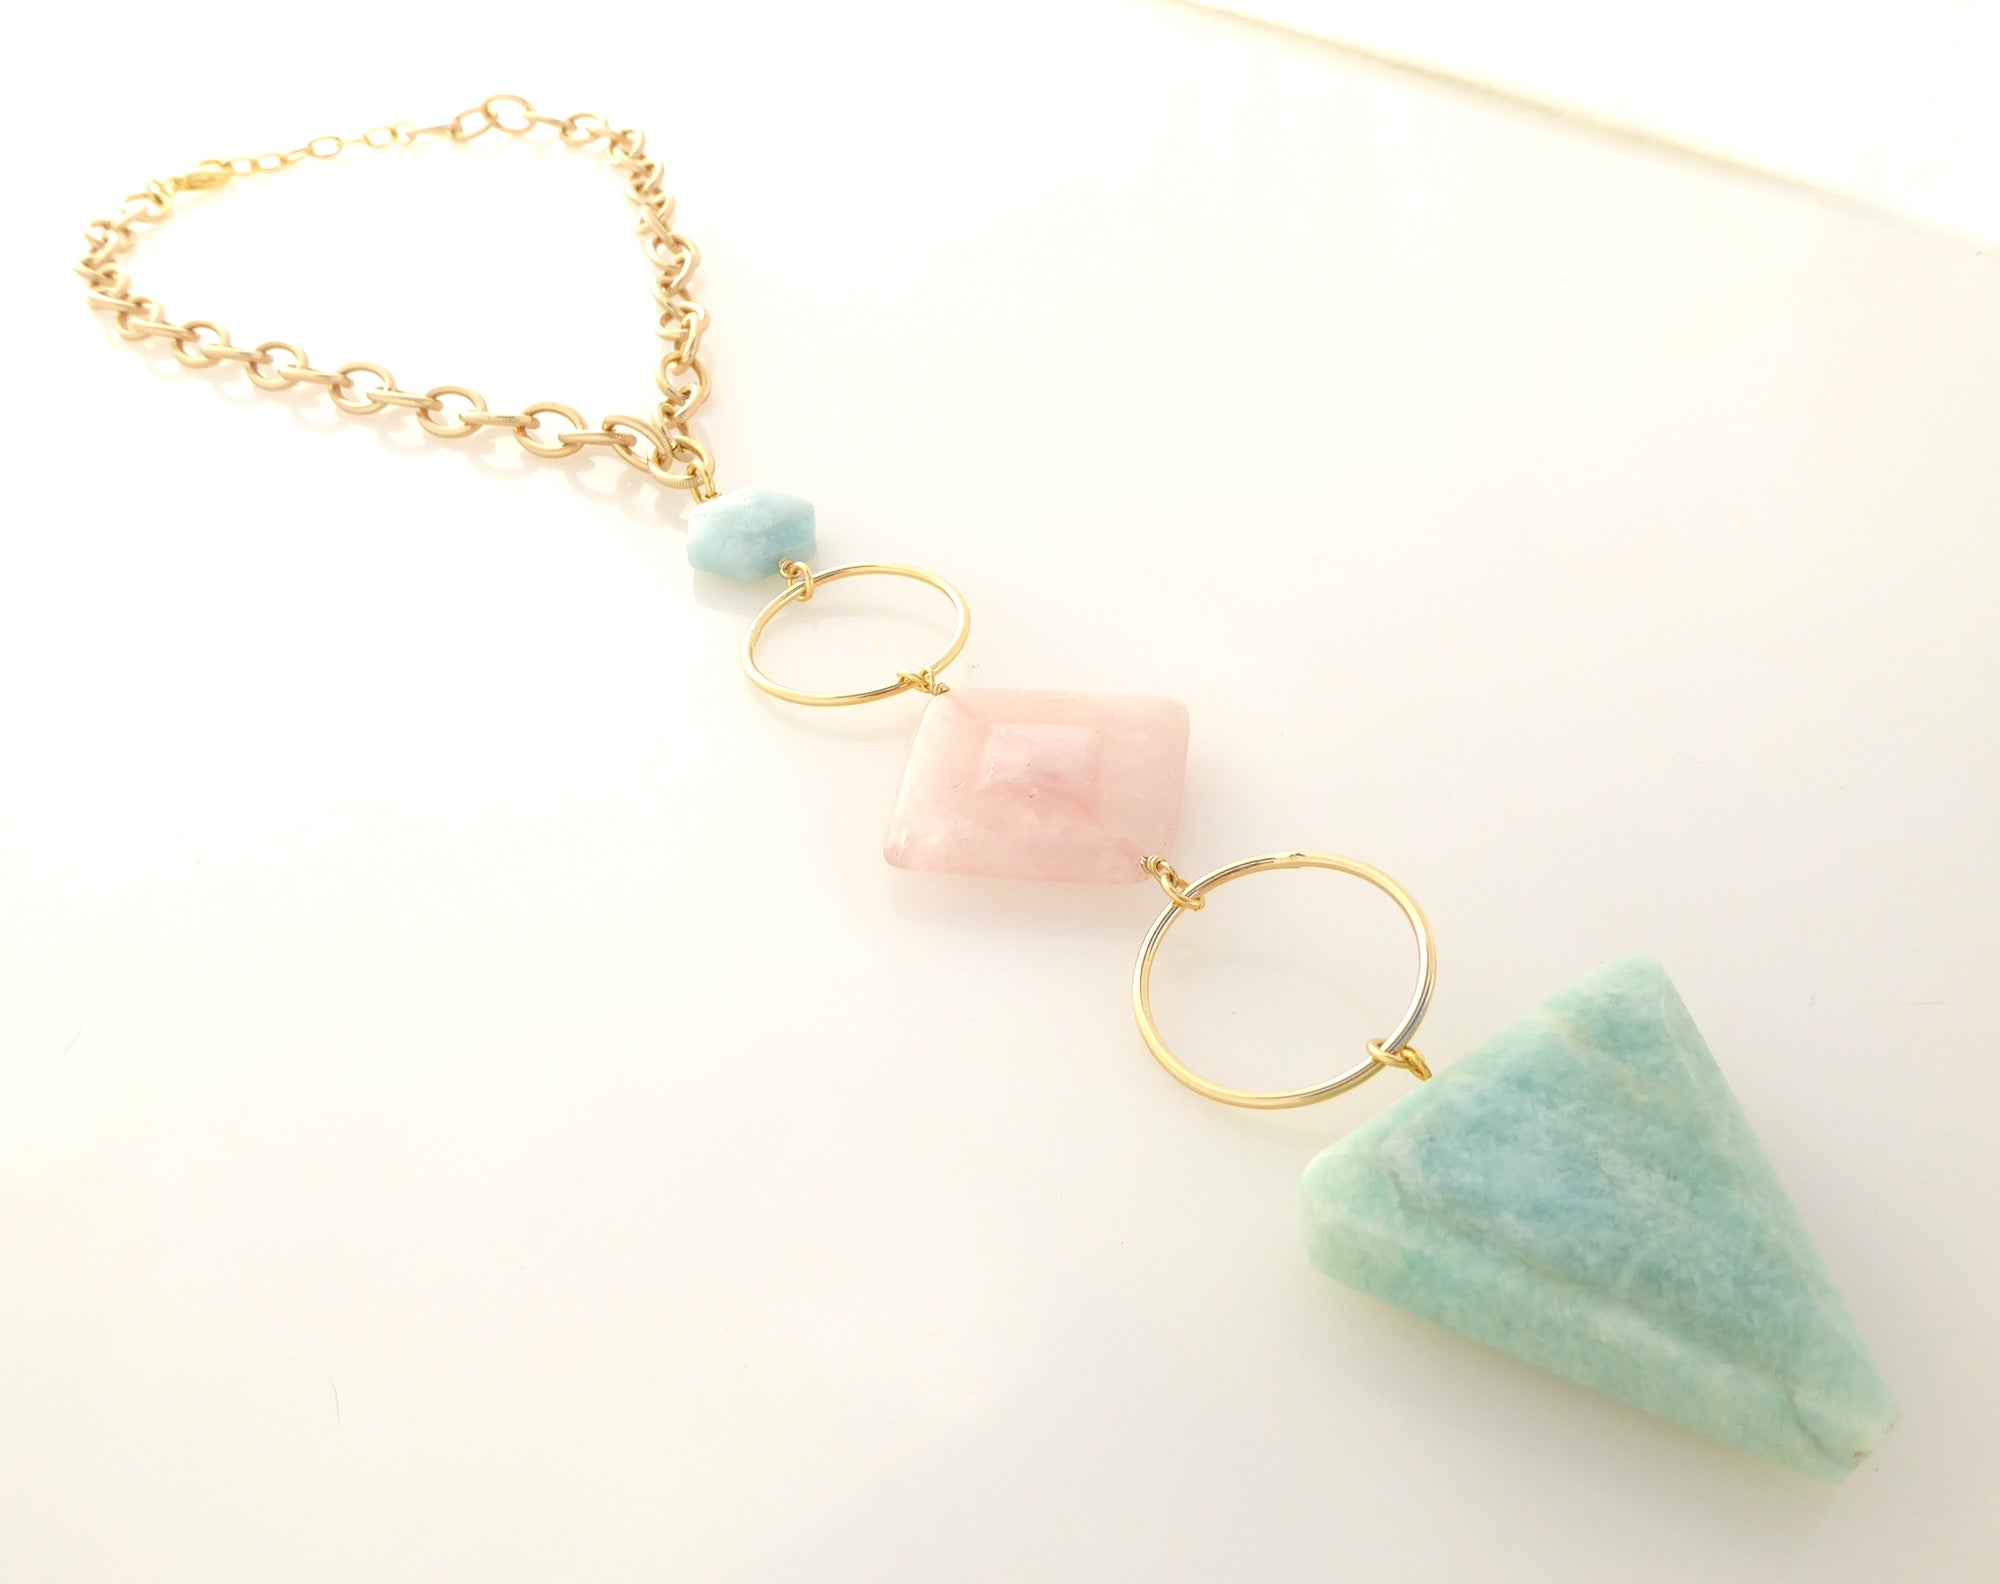 Gioia amazonite and rose quartz necklace by Jenny Dayco 2